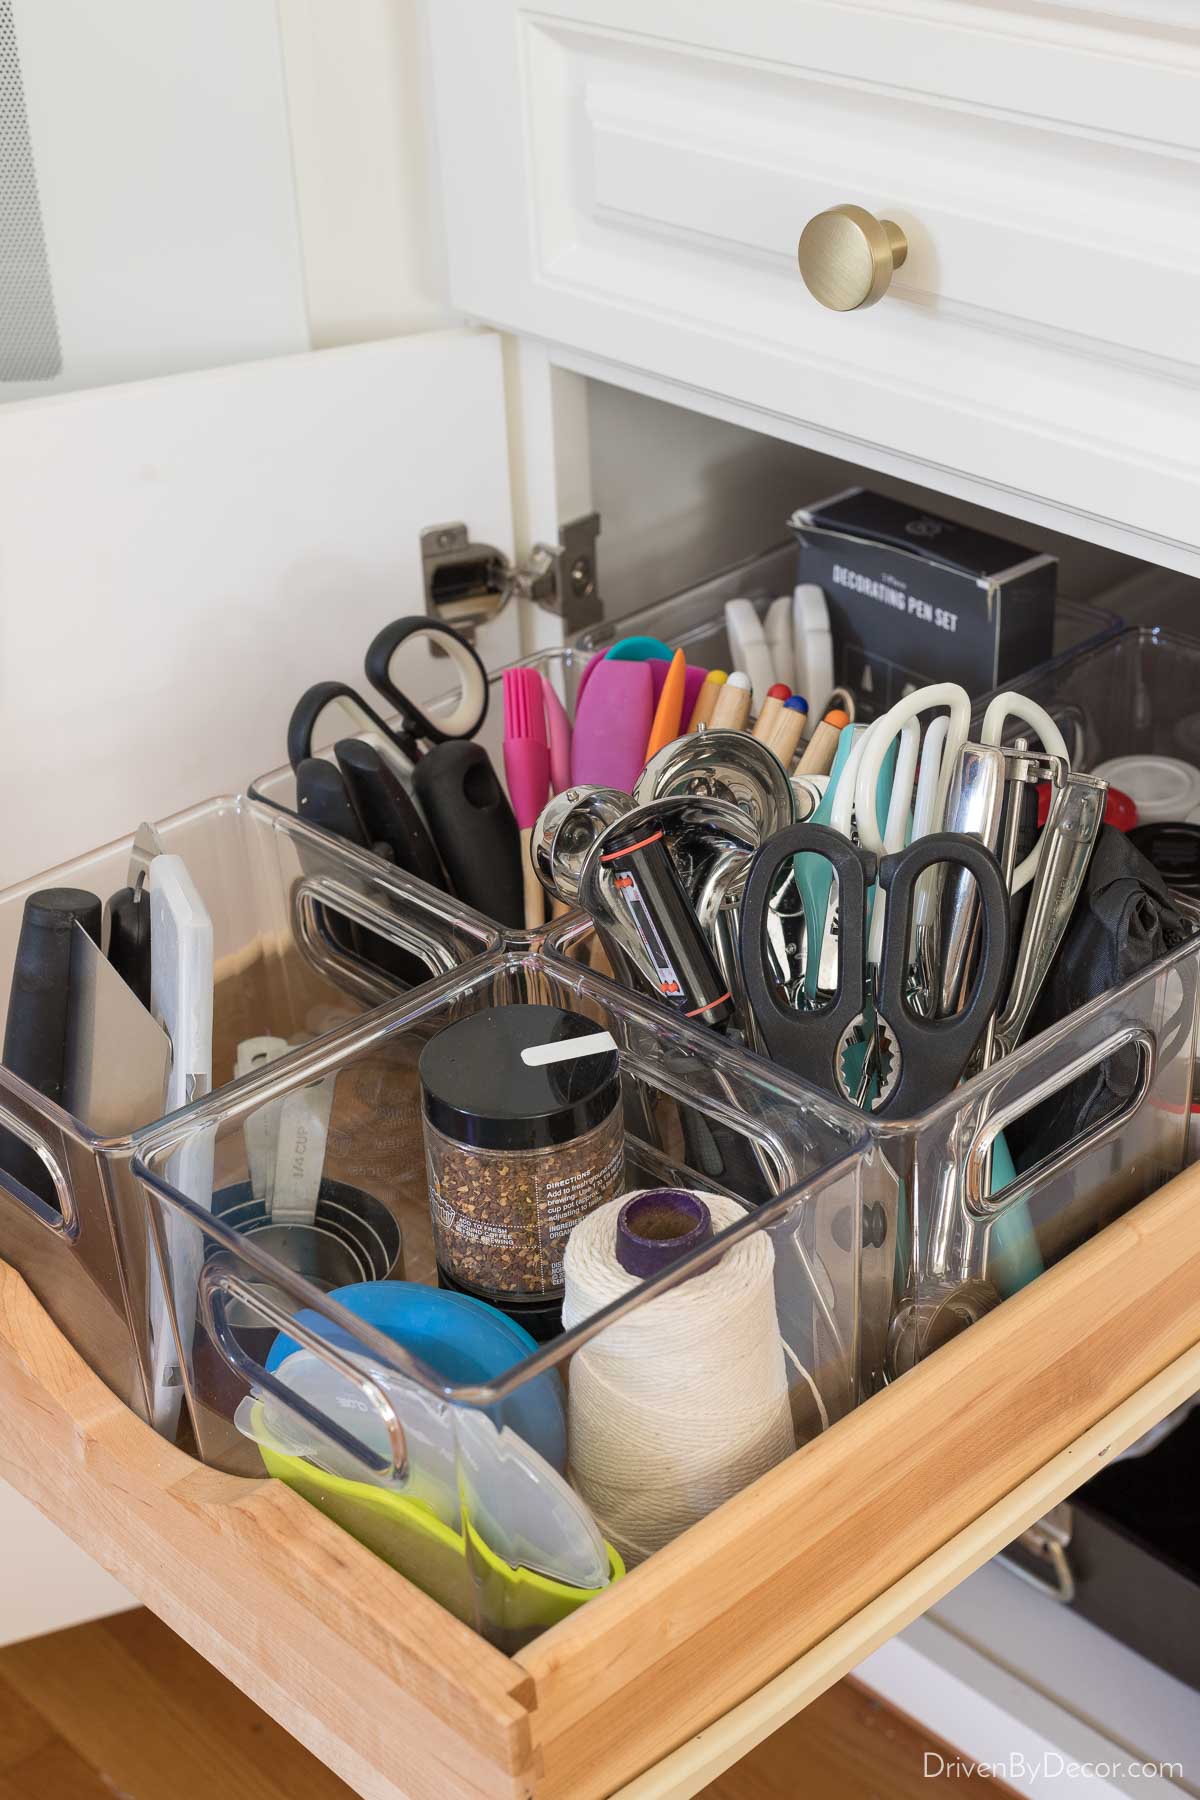 10 Of The Best Kitchen Cabinet Organizers On